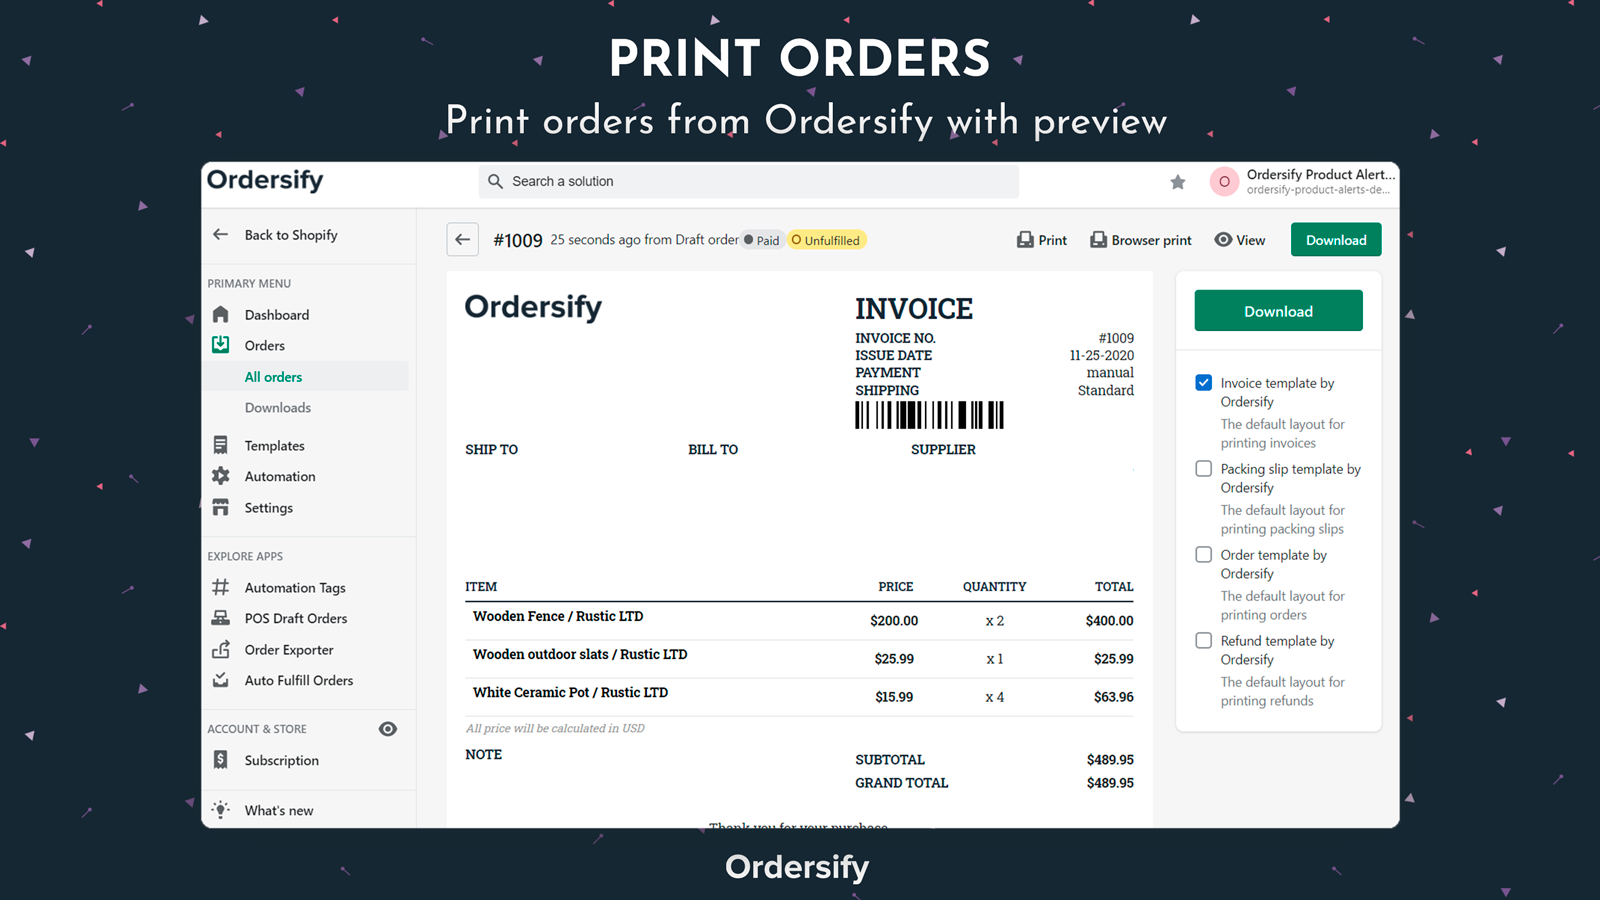 Print orders from Ordersify with preview